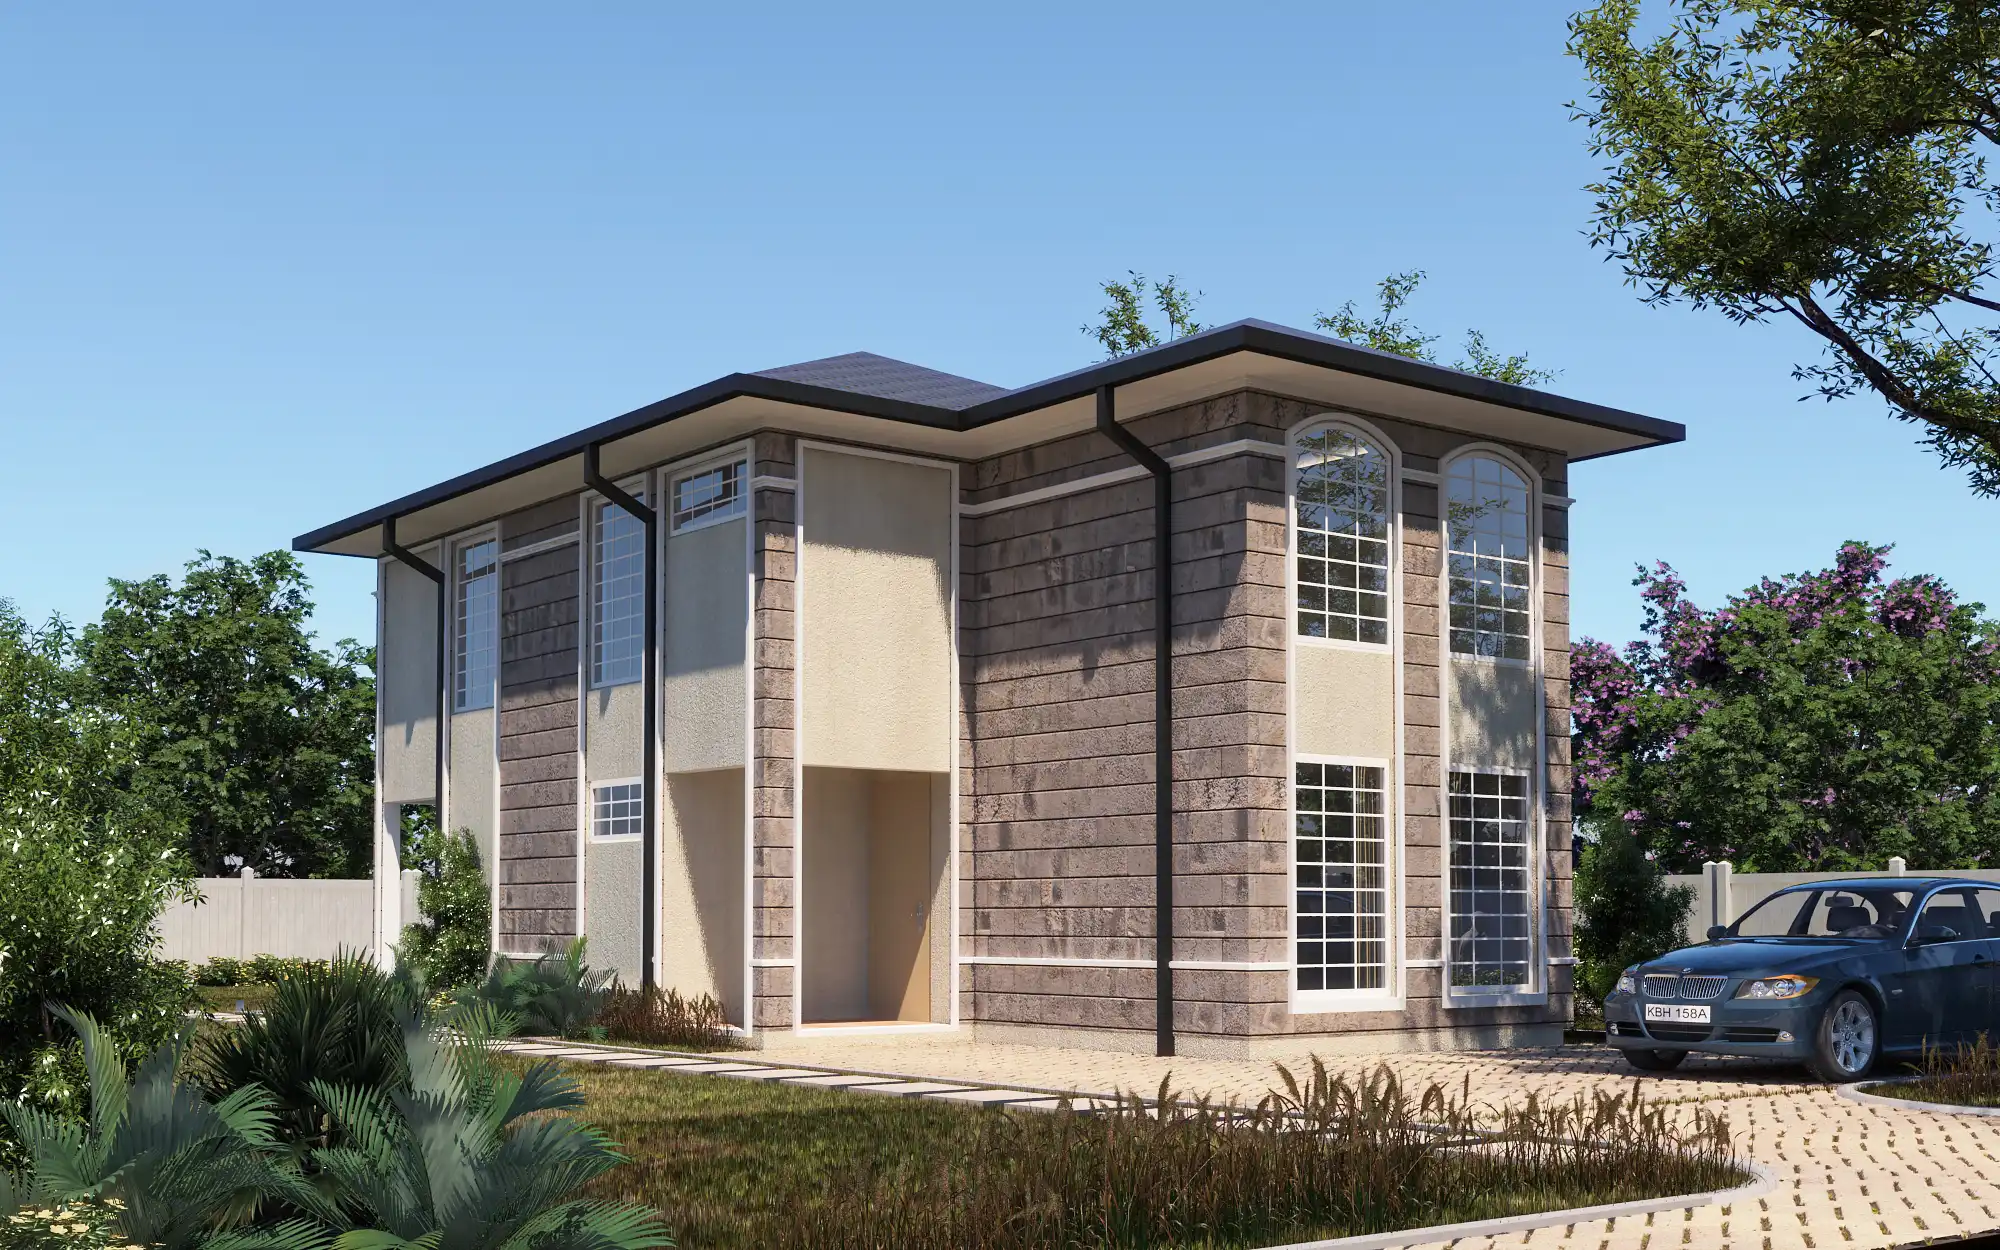 3 Bedroom Maisonette - ID 3261 - Front from Inuua Tujenge house plans with 3 bedrooms and 2 bathrooms. ( maisonette )